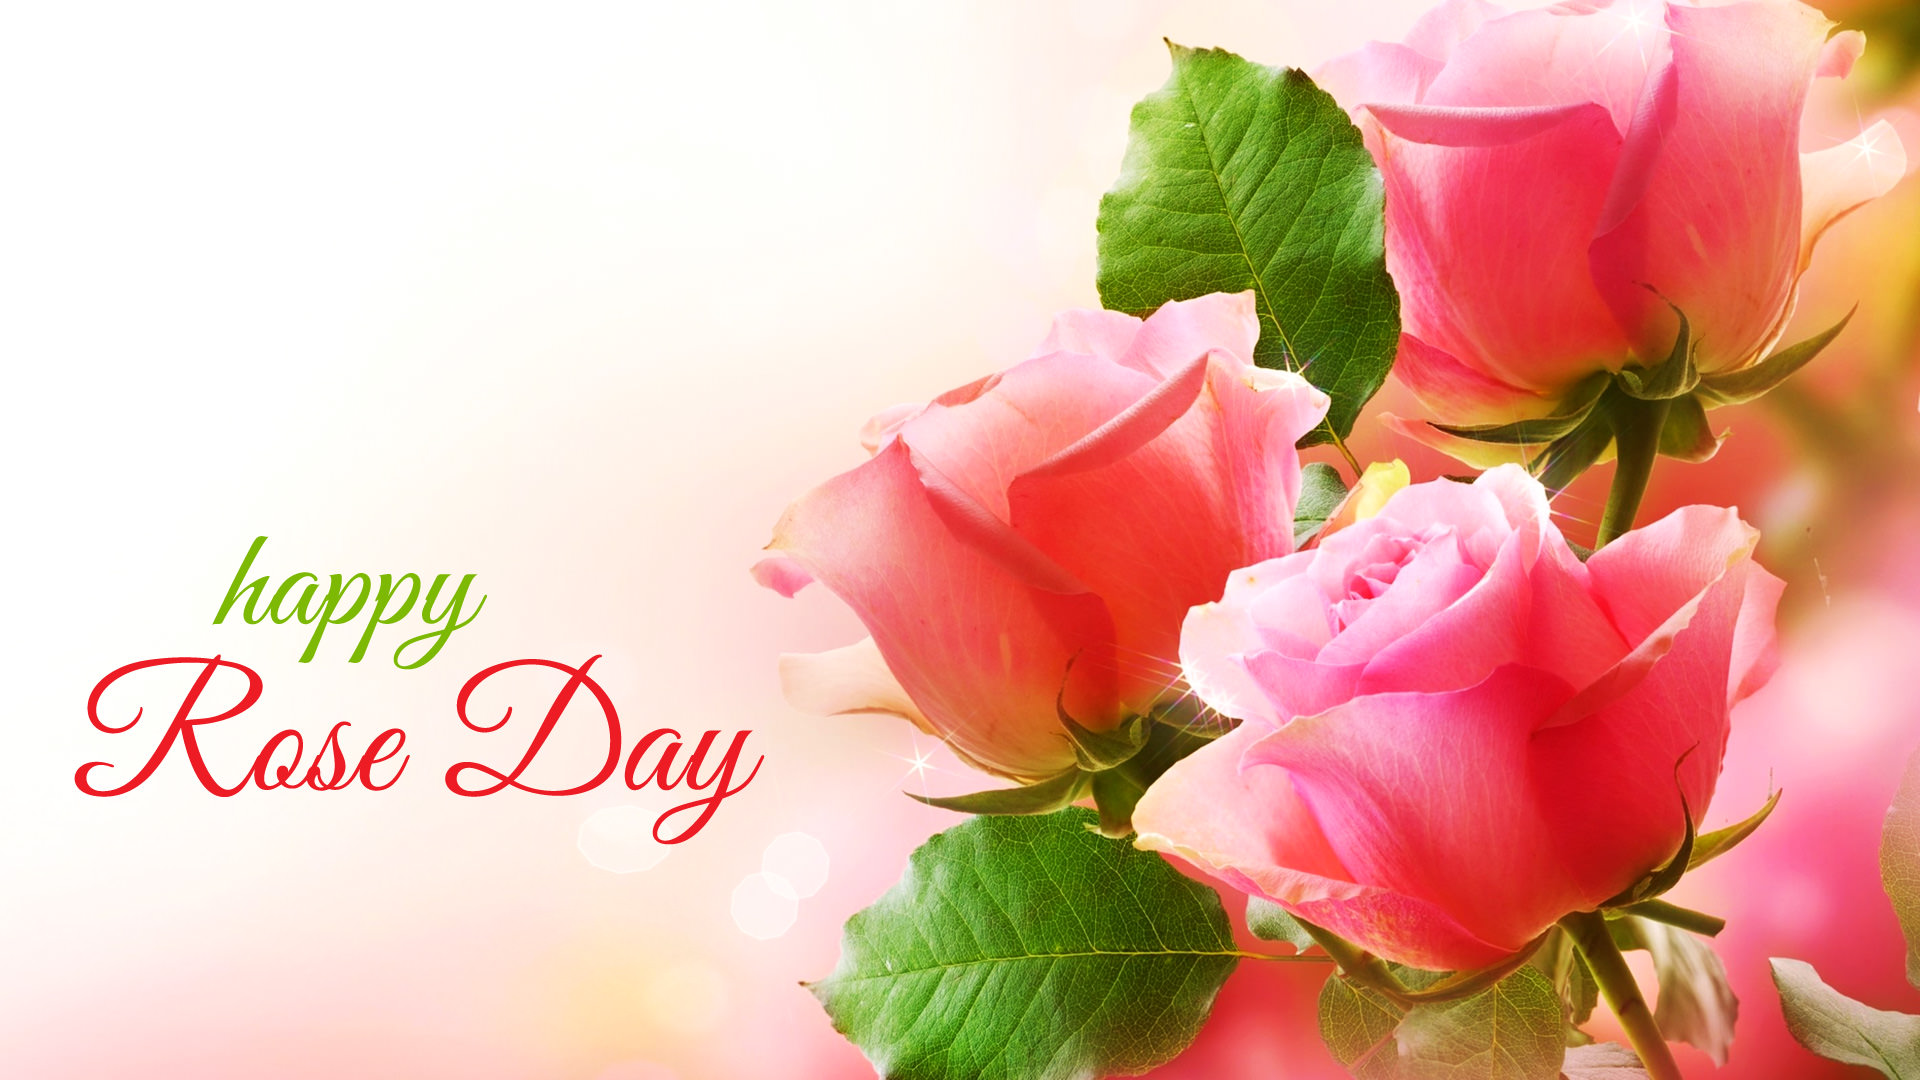 7th Feb Rose Day Wallpaper HD | All Color of Roses for Lover & Friends